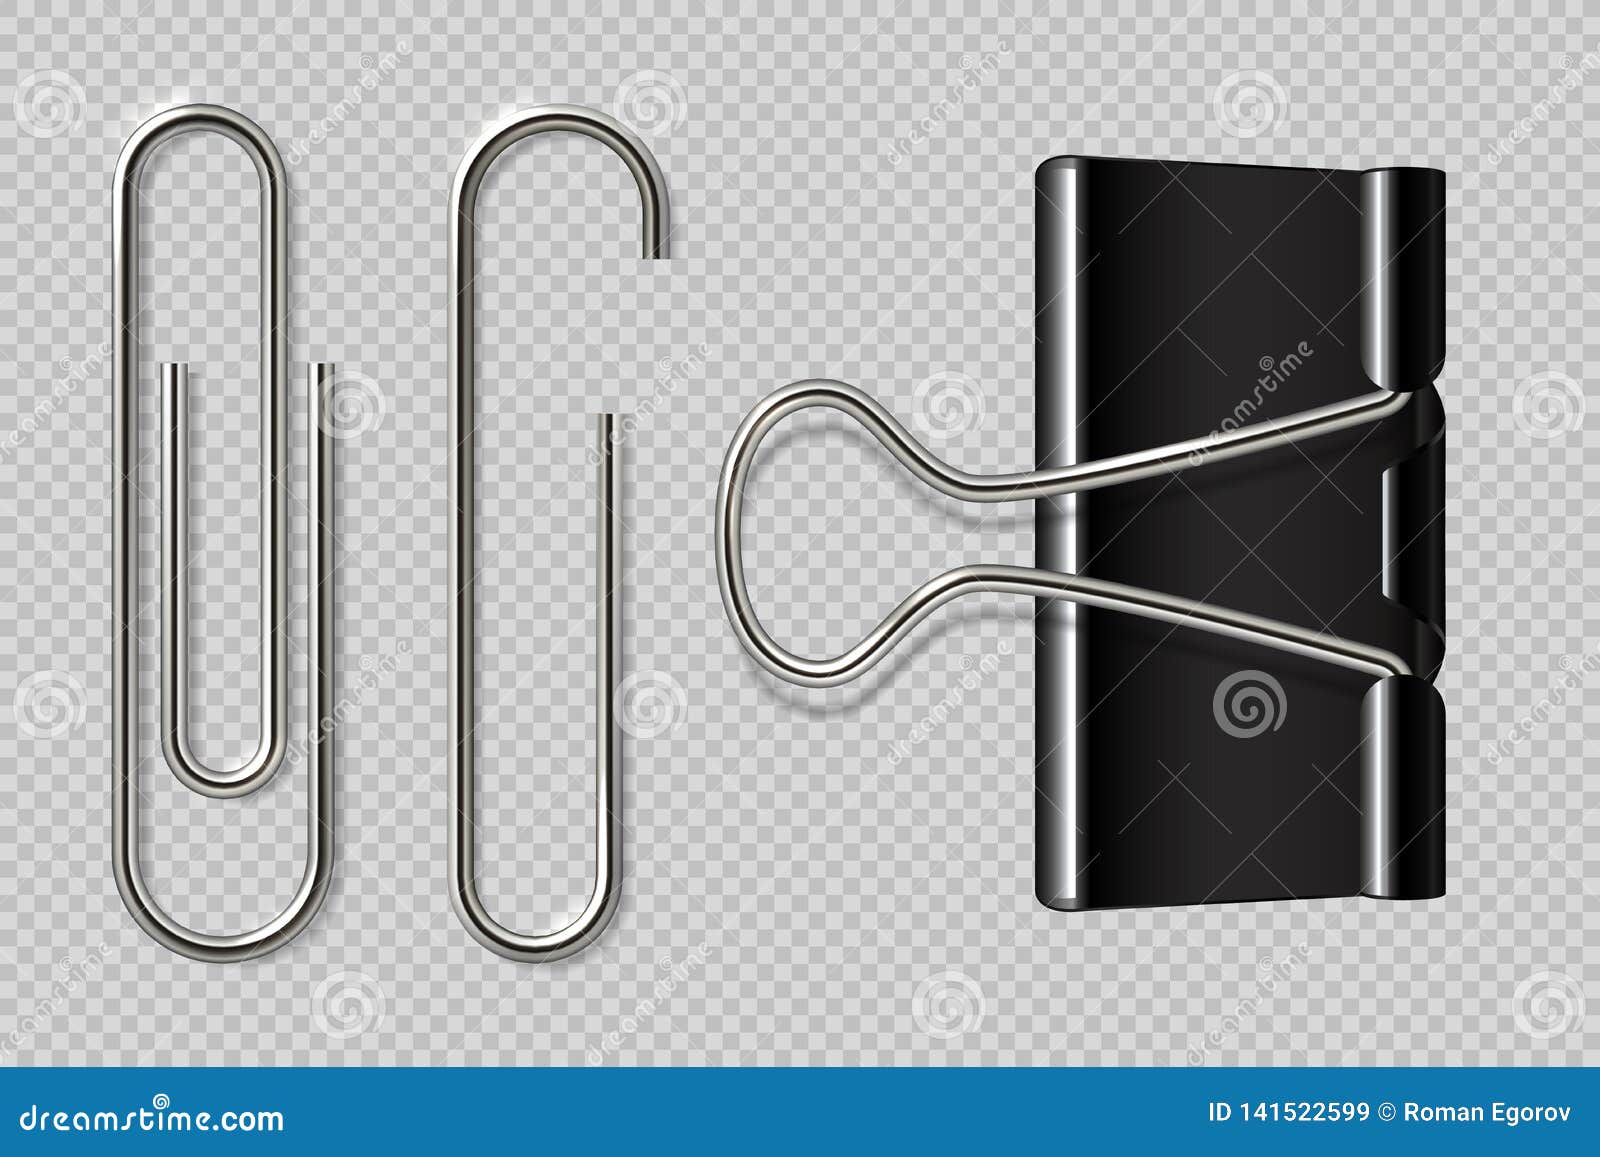 paper clips. realistic binder, paper holder  on white background, macro metal notebook fasteners.  paper